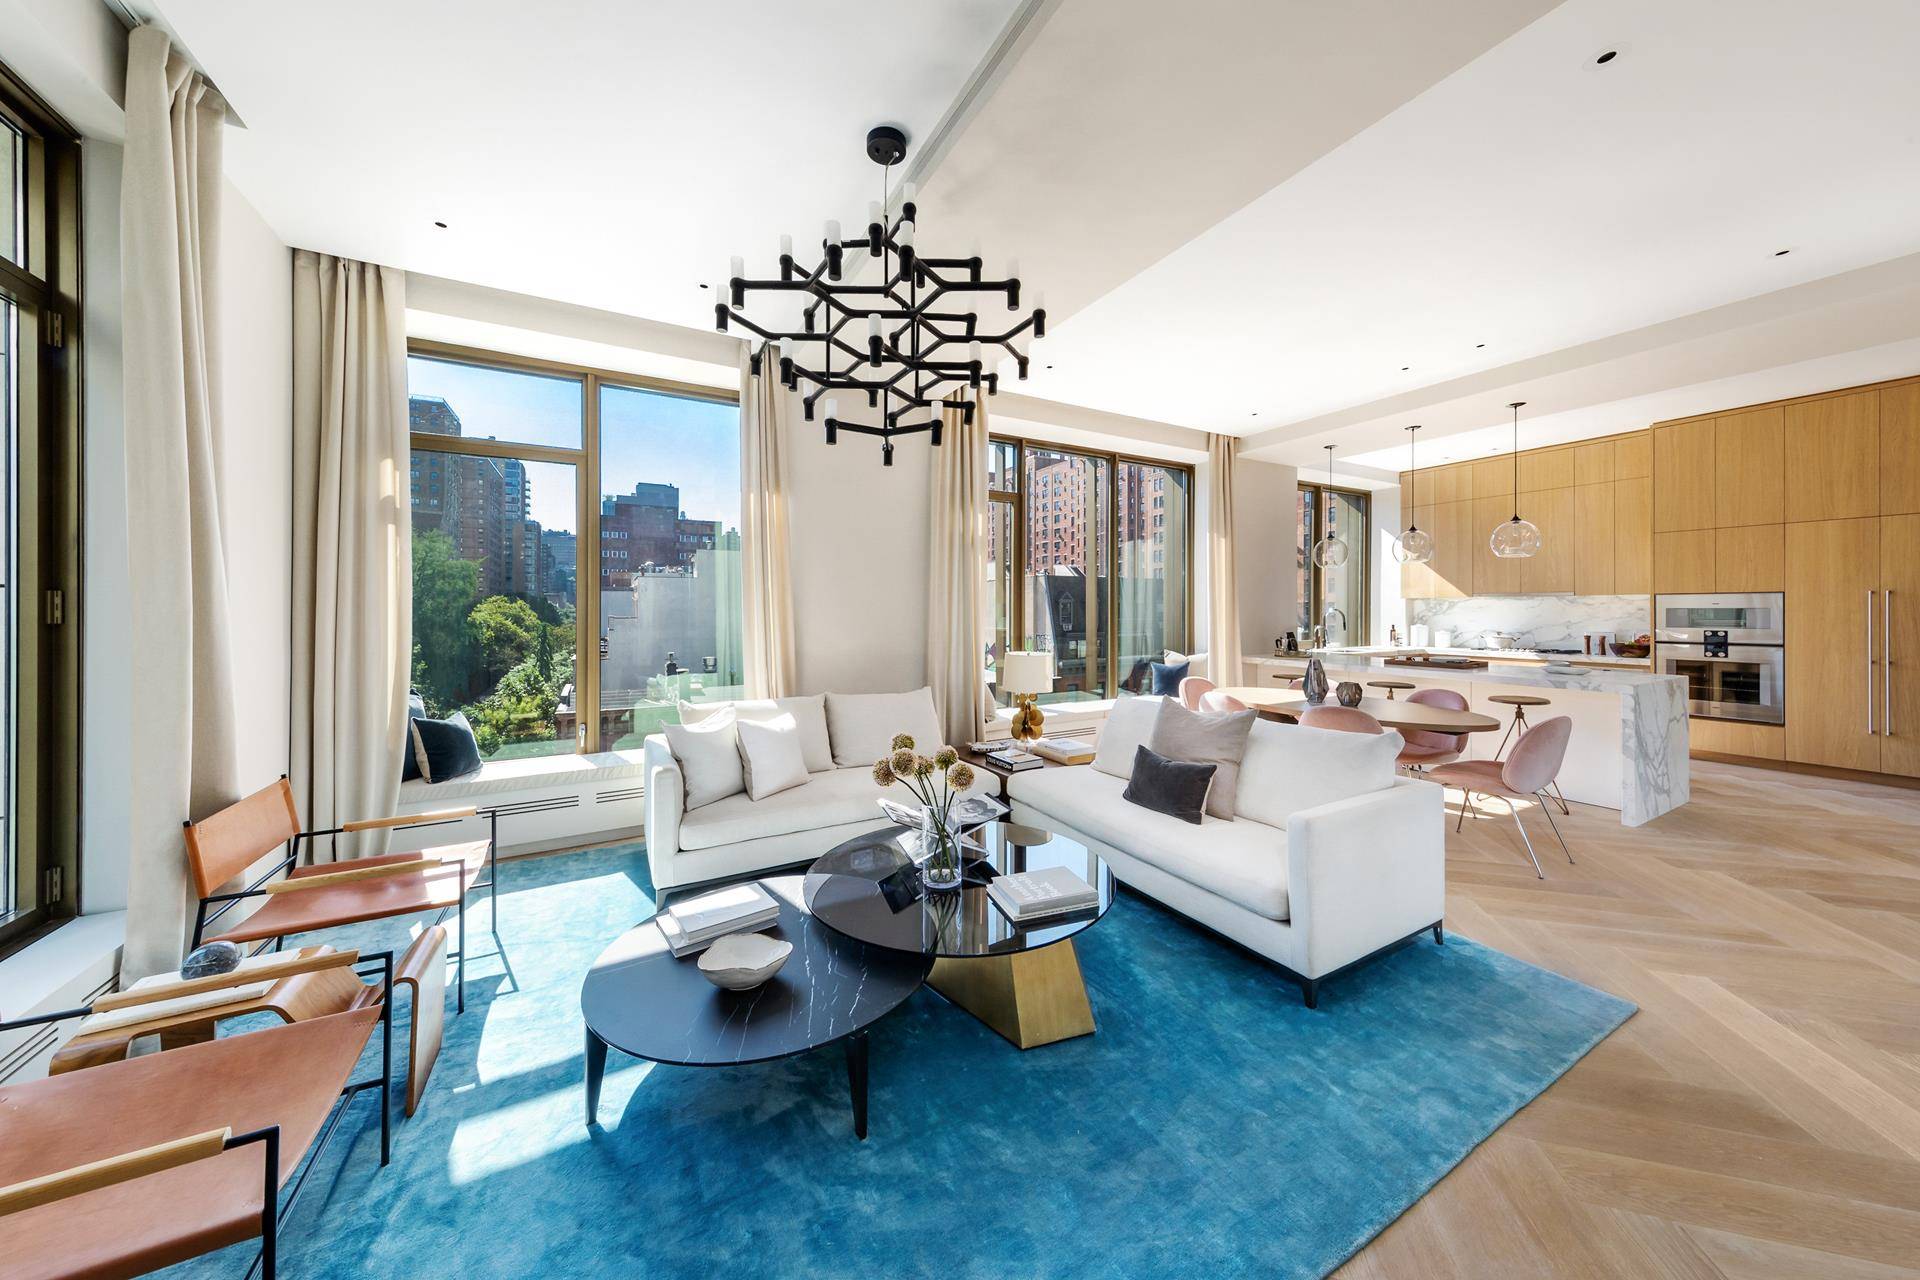 Welcome to The Emerson at 500 West 25thStreet, a beacon of elevated luxury and lifestyle in the heart of West Chelsea.